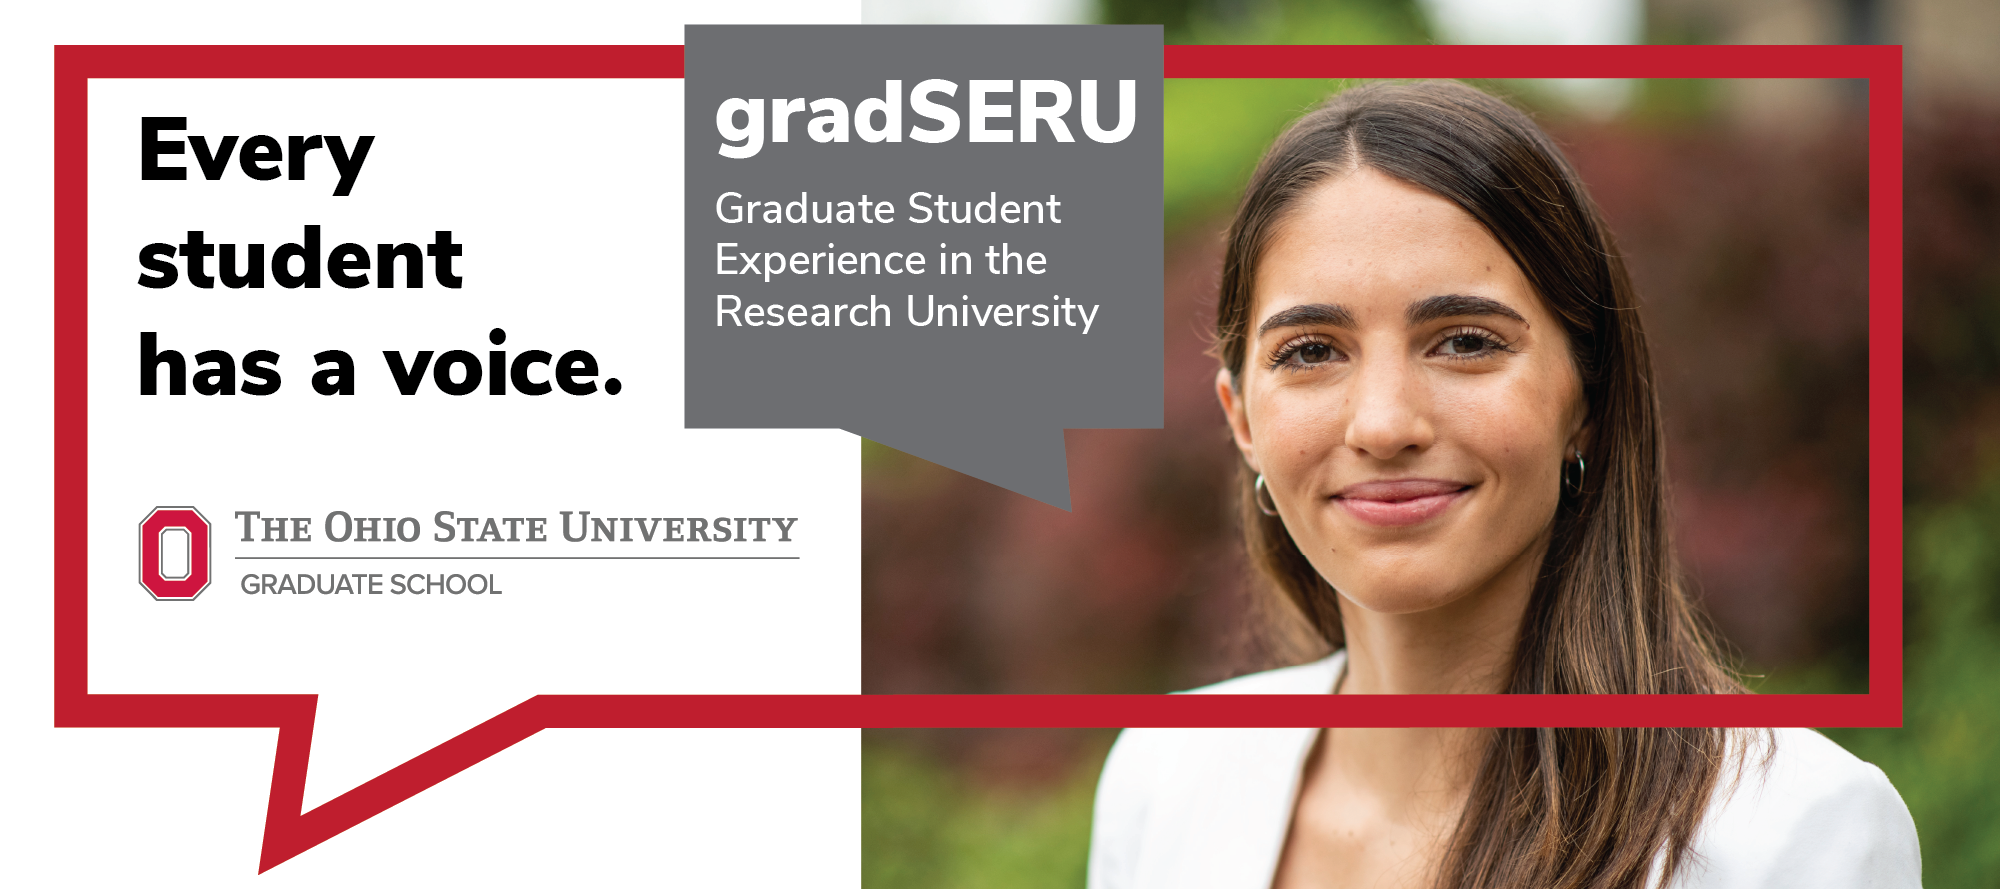 gradseru ad featuring a graduate student smiling along side the text Ever Student has a voice